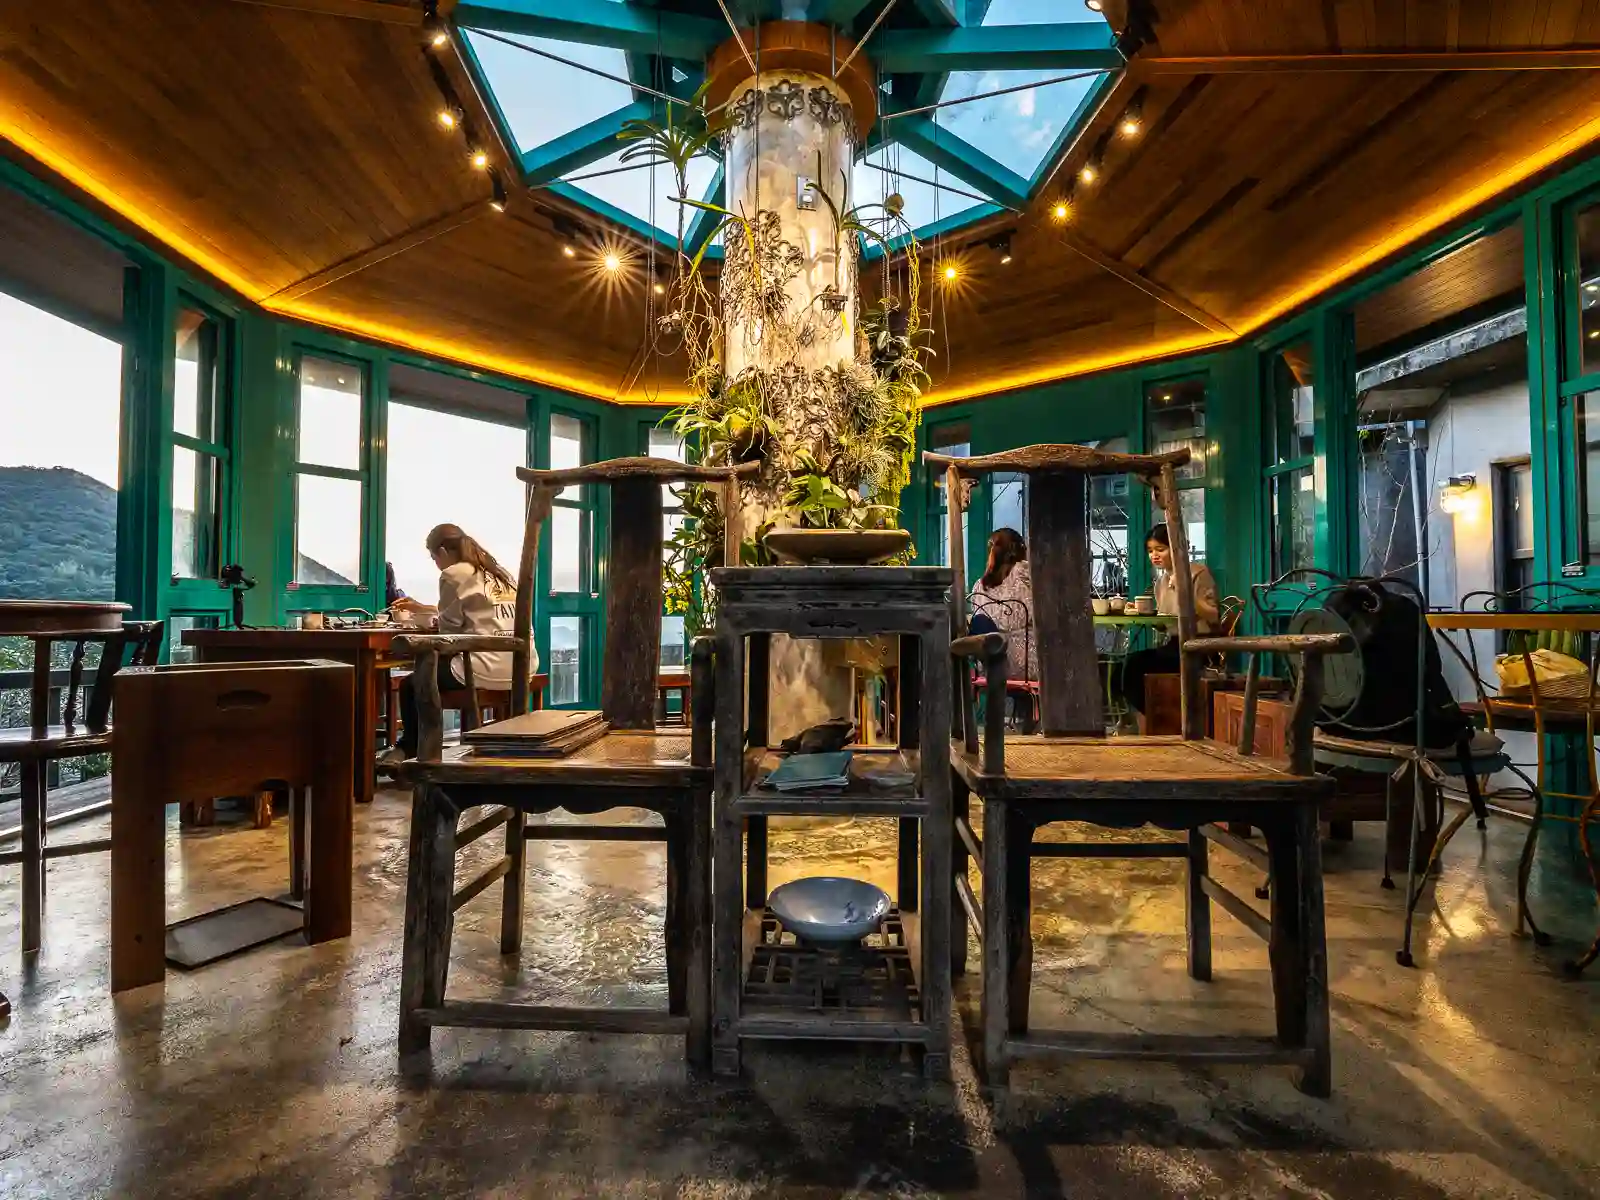 The covered pavilion seating area of Jiufen Tea House is round and surrounded with floor-to-ceiling glass windows.